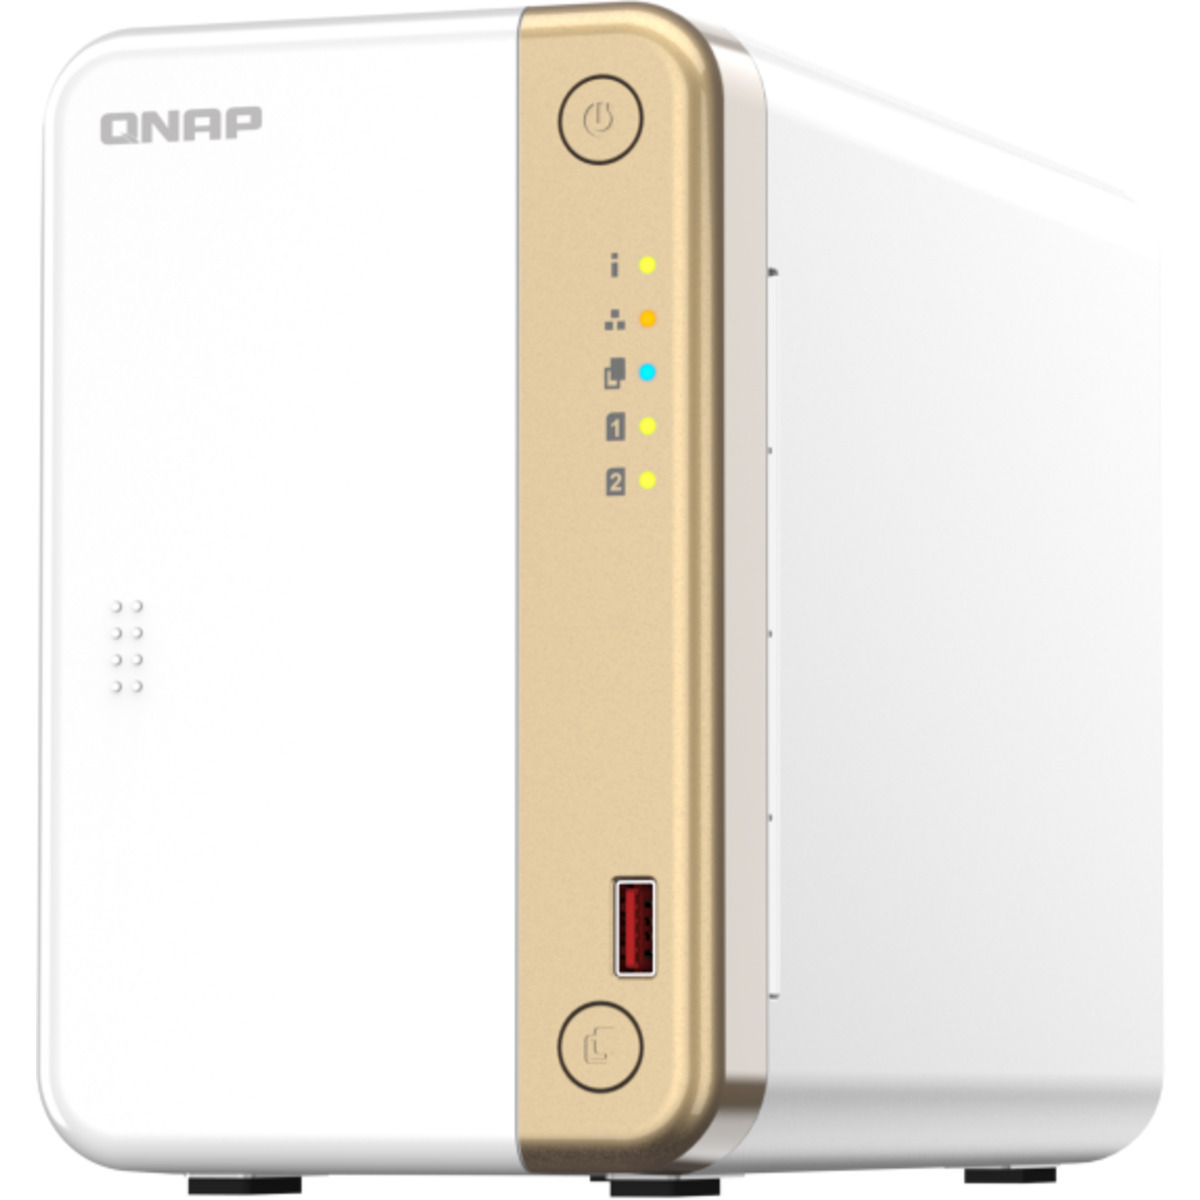 QNAP TS-262 8tb 2-Bay Desktop Personal / Basic Home / Small Office NAS - Network Attached Storage Device 2x4tb Toshiba MN Series MN08ADA400E 3.5 7200rpm SATA 6Gb/s HDD NAS Class Drives Installed - Burn-In Tested - ON SALE TS-262